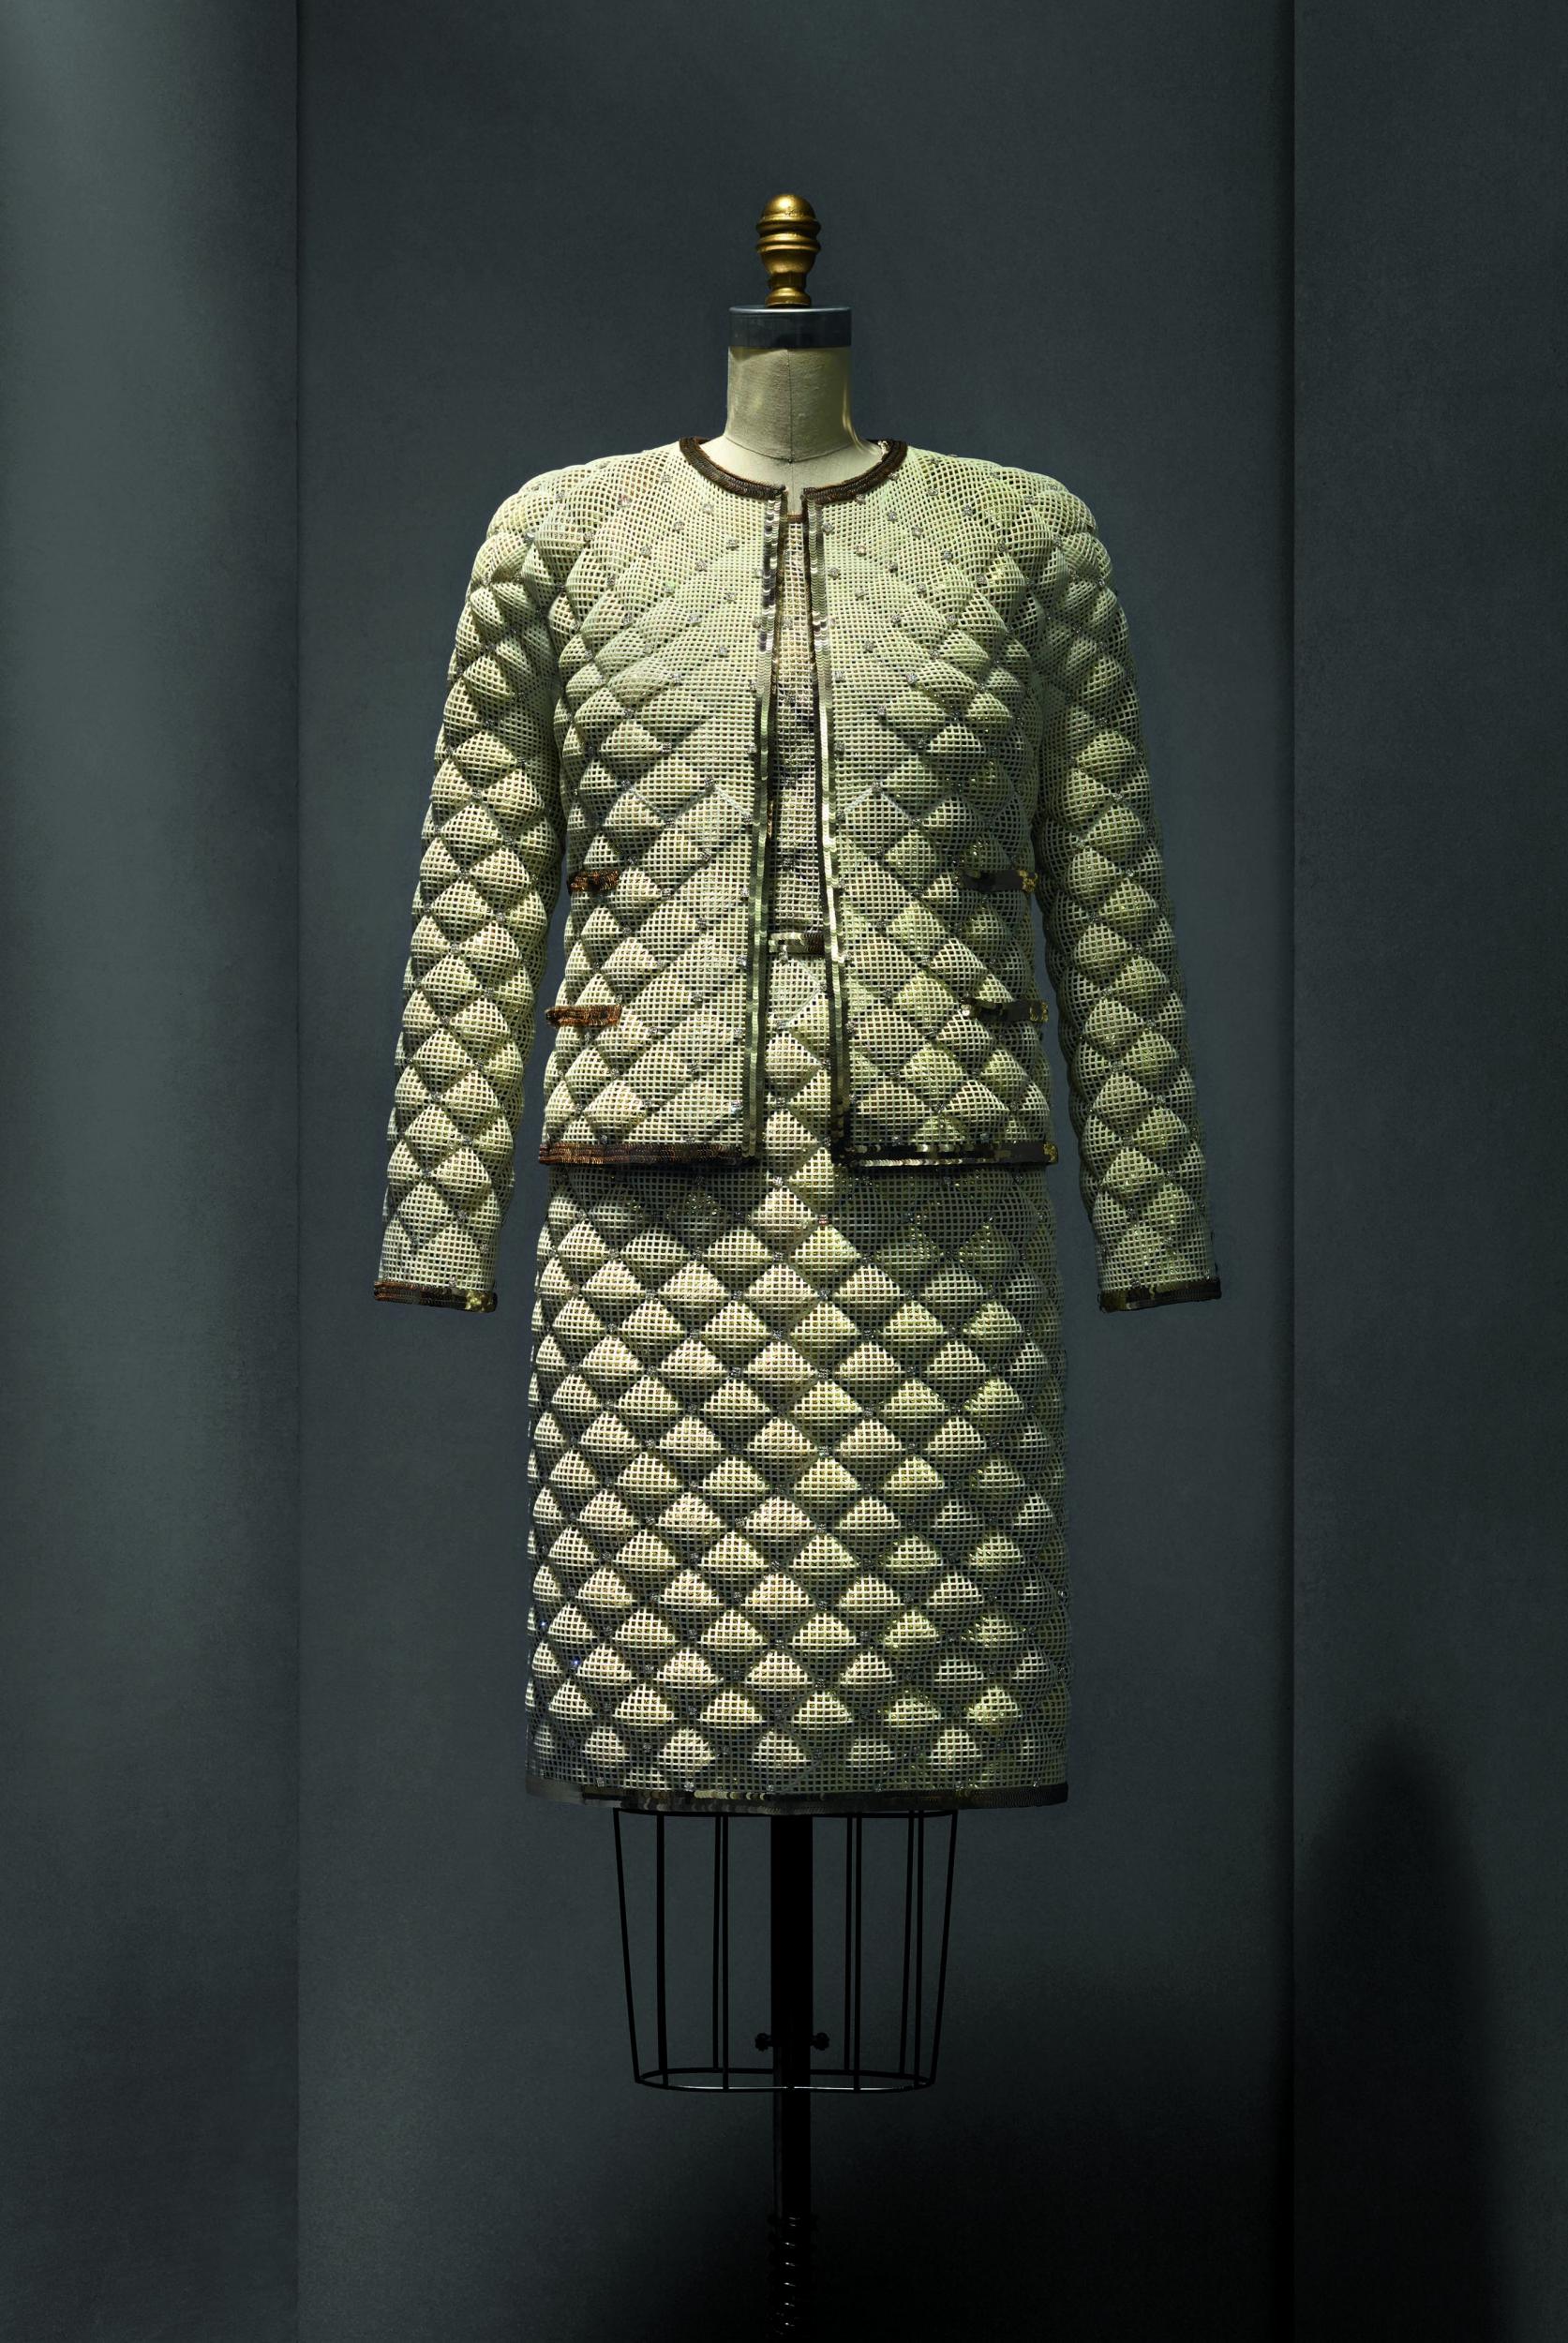 A 3-D printed Chanel suit, from Karl Lagerfeld's autumn/winter 2015 haute couture collection